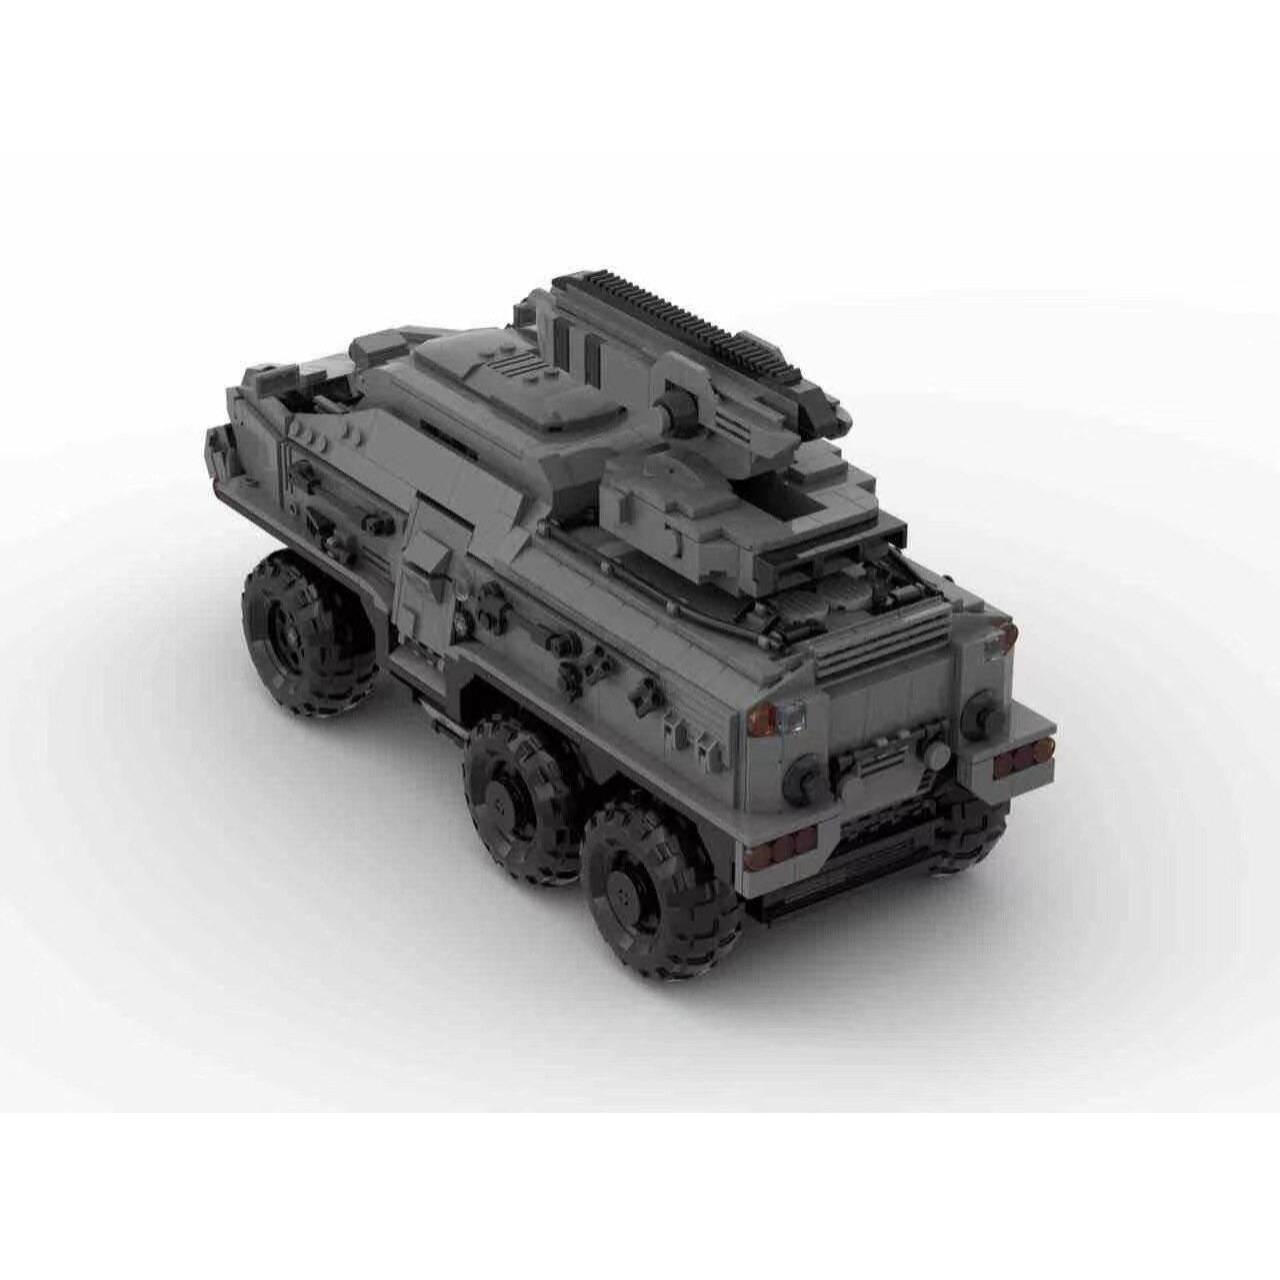 Futuristic APC Radio Controlled (Minifig Size) MILITARY MOC-58291 by Kilo-Whiskey WITH 1498 PIECES